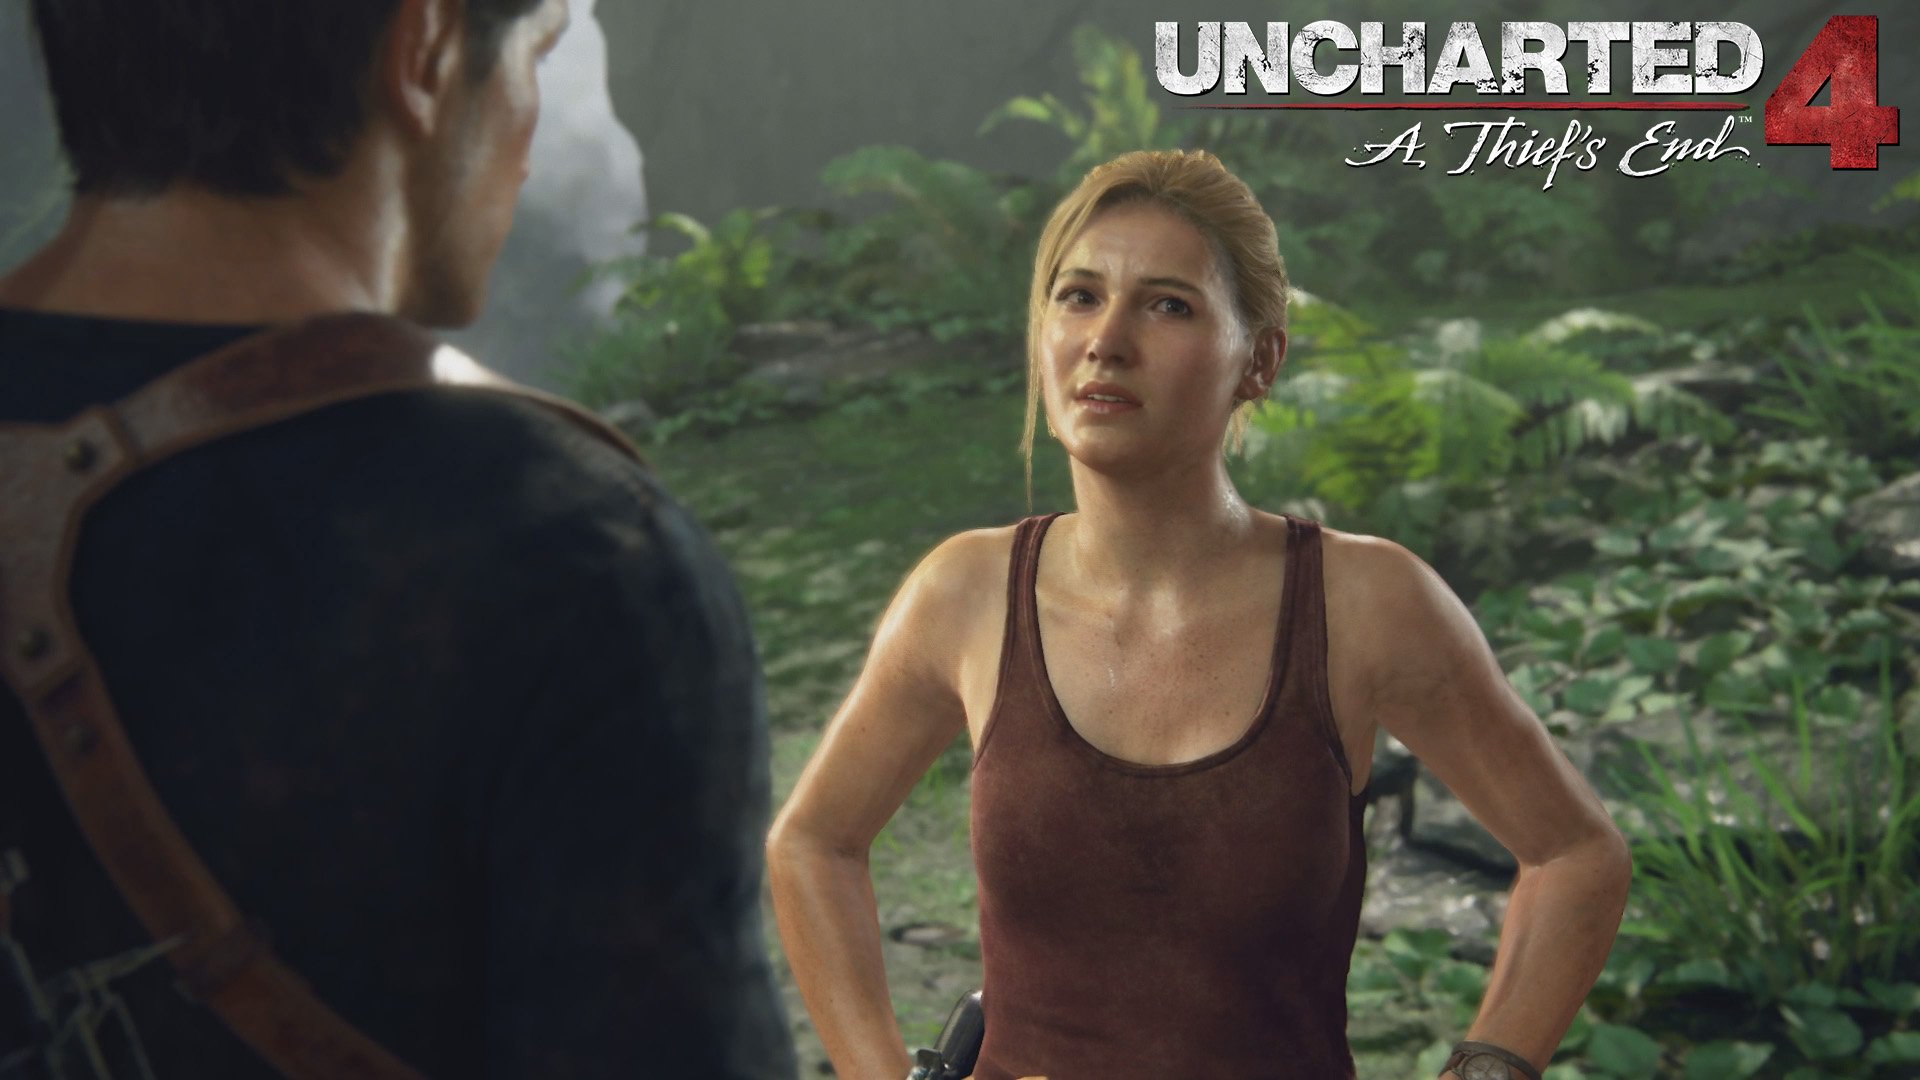 Uncharted 4: A Thief’s End ➪ # 22) Елена